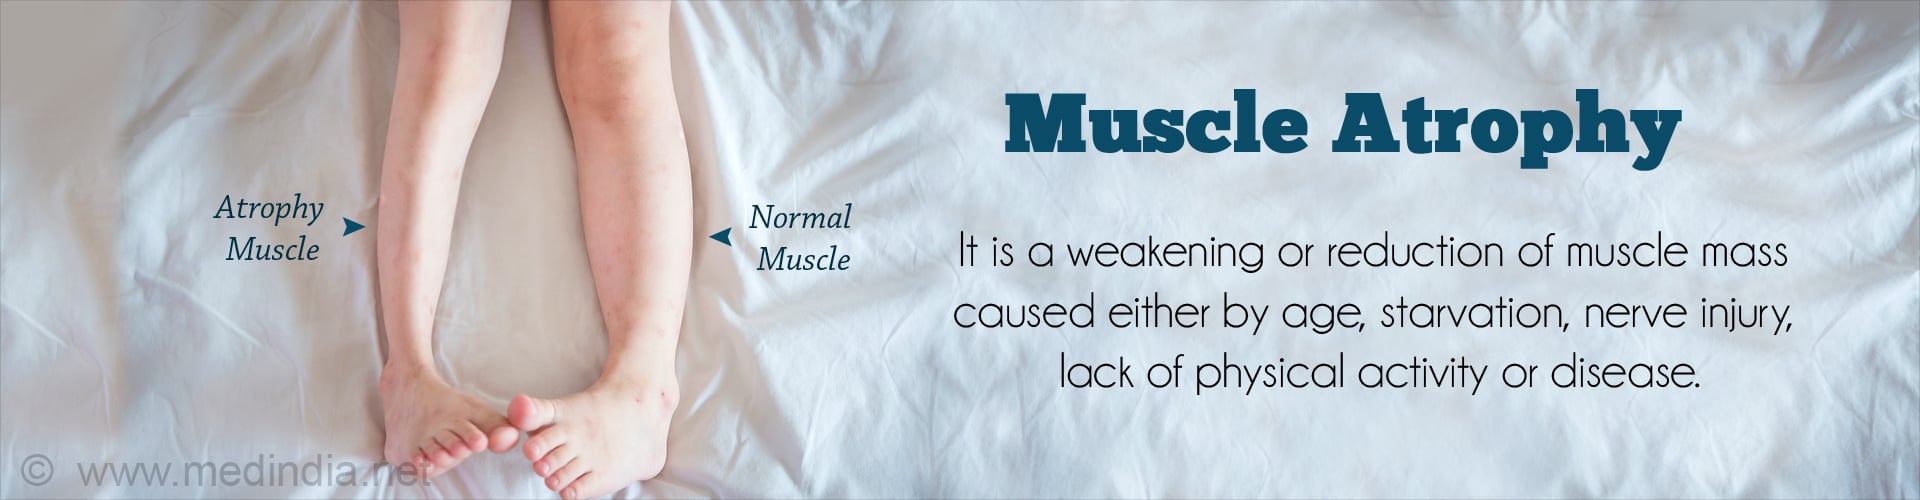 Muscle Atrophy: It is a weakening or reduction of muscle mass caused either by age, starvation, nerve injury, lack of physical activity or disease